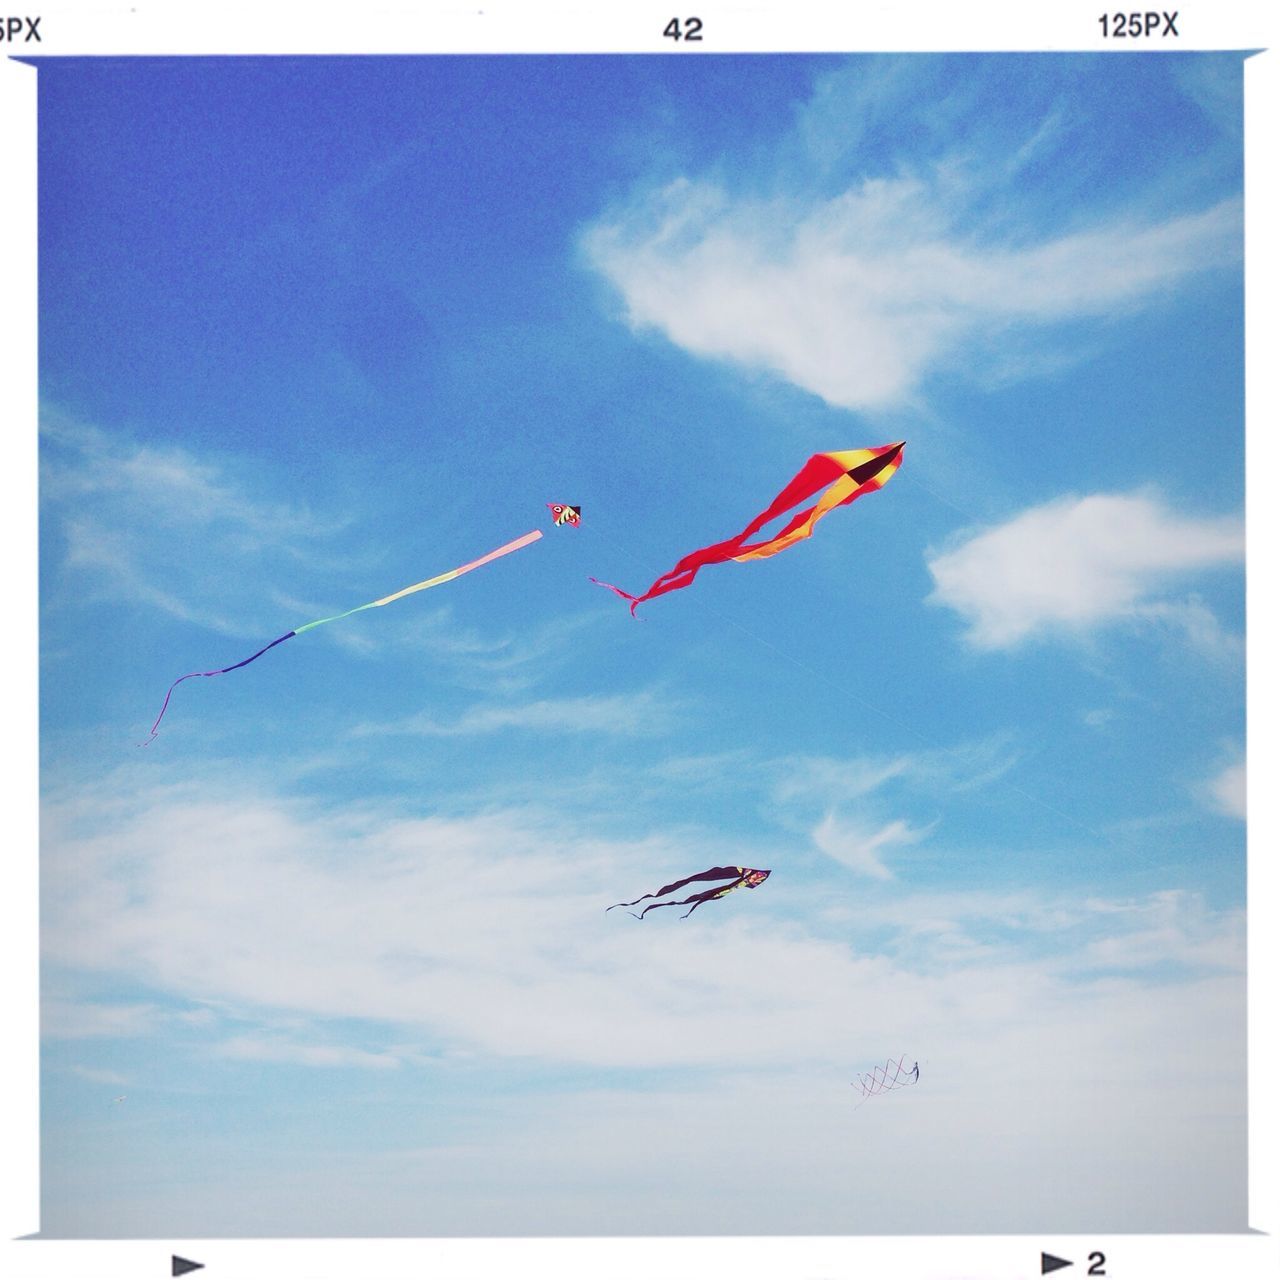 flying, low angle view, mid-air, sky, transportation, blue, cloud - sky, air vehicle, airplane, airshow, mode of transport, freedom, kite - toy, cloud, flag, wind, on the move, motion, patriotism, day